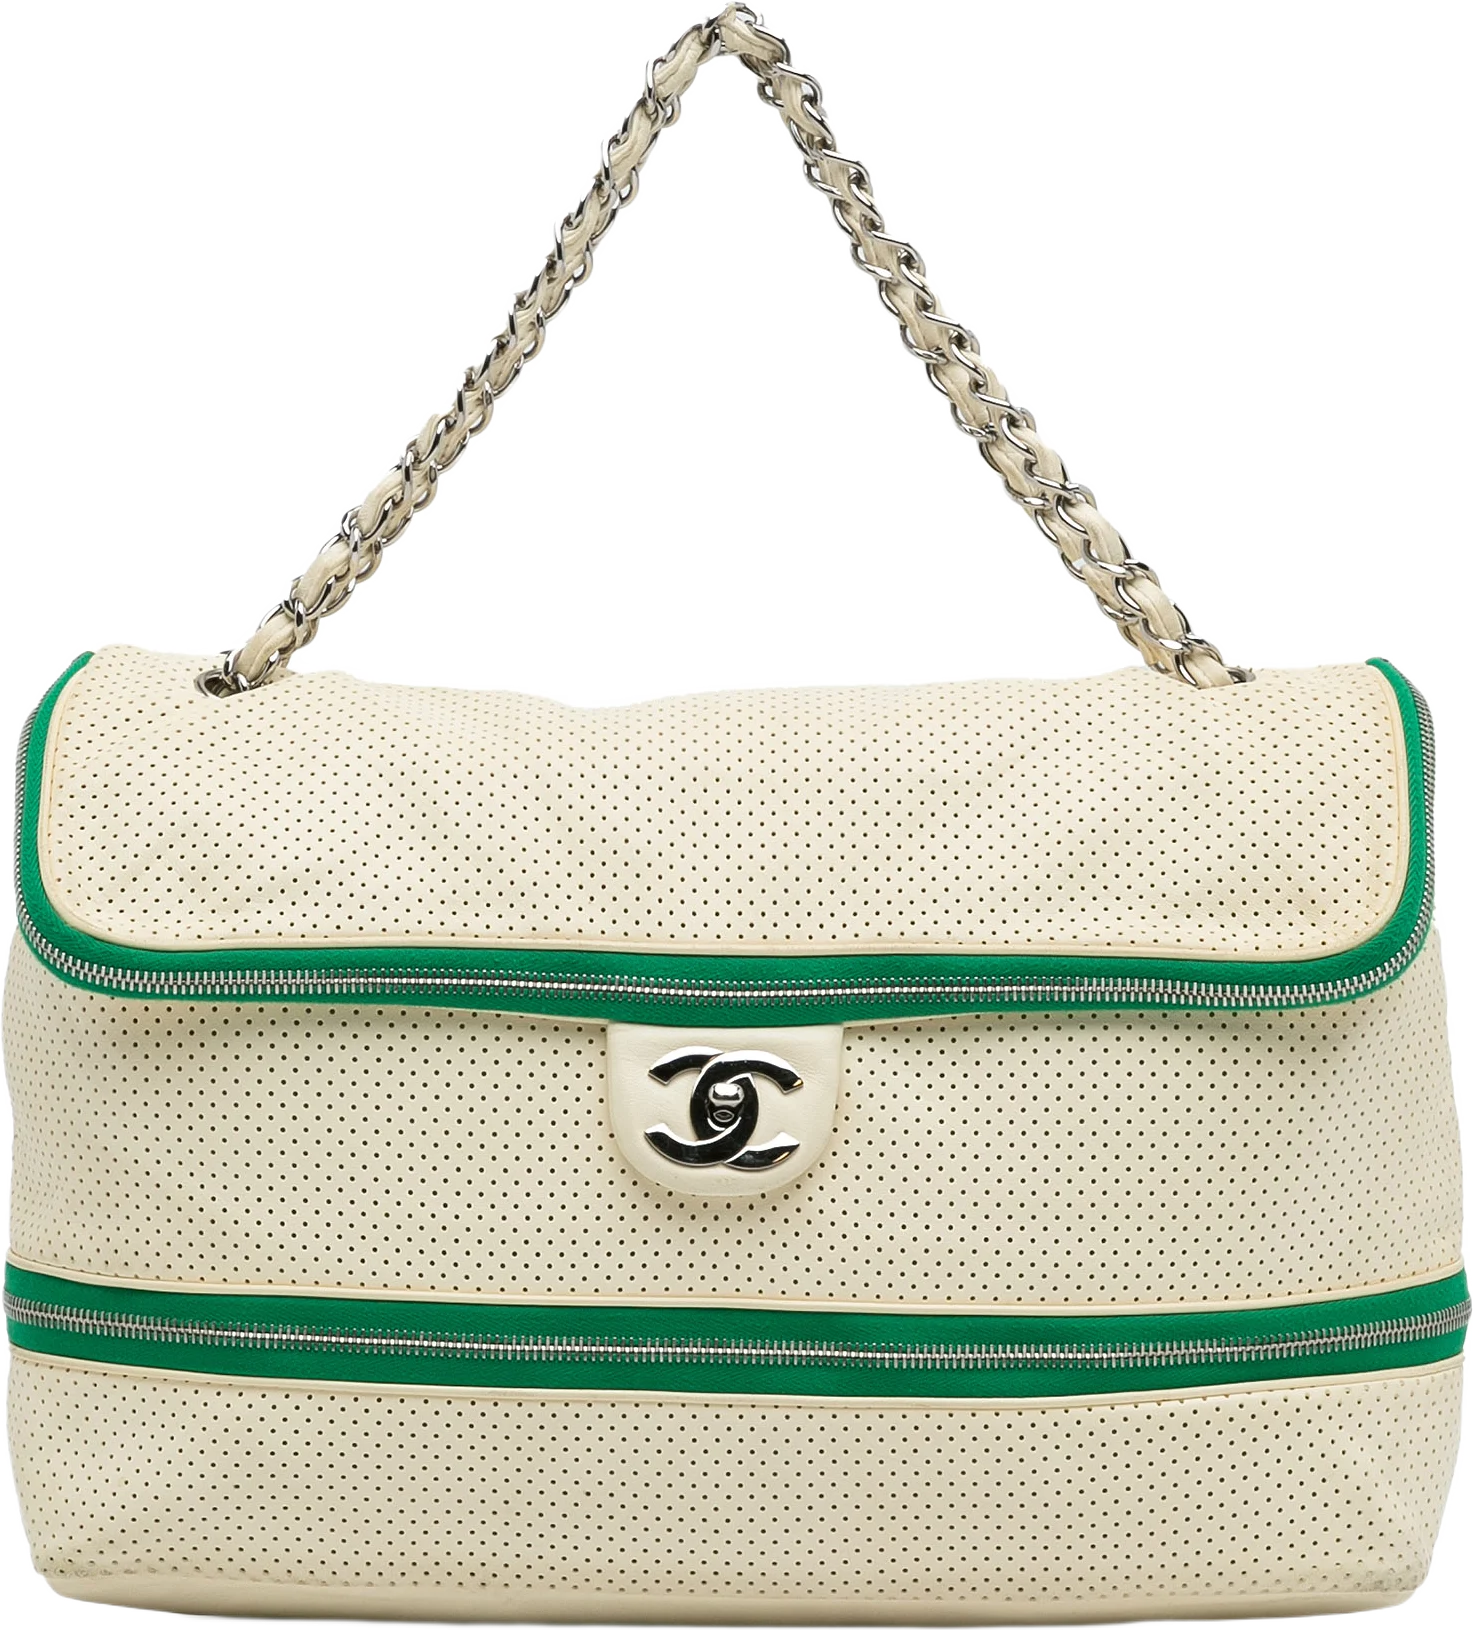 Chanel Perforated Expandable Shoulder Bag